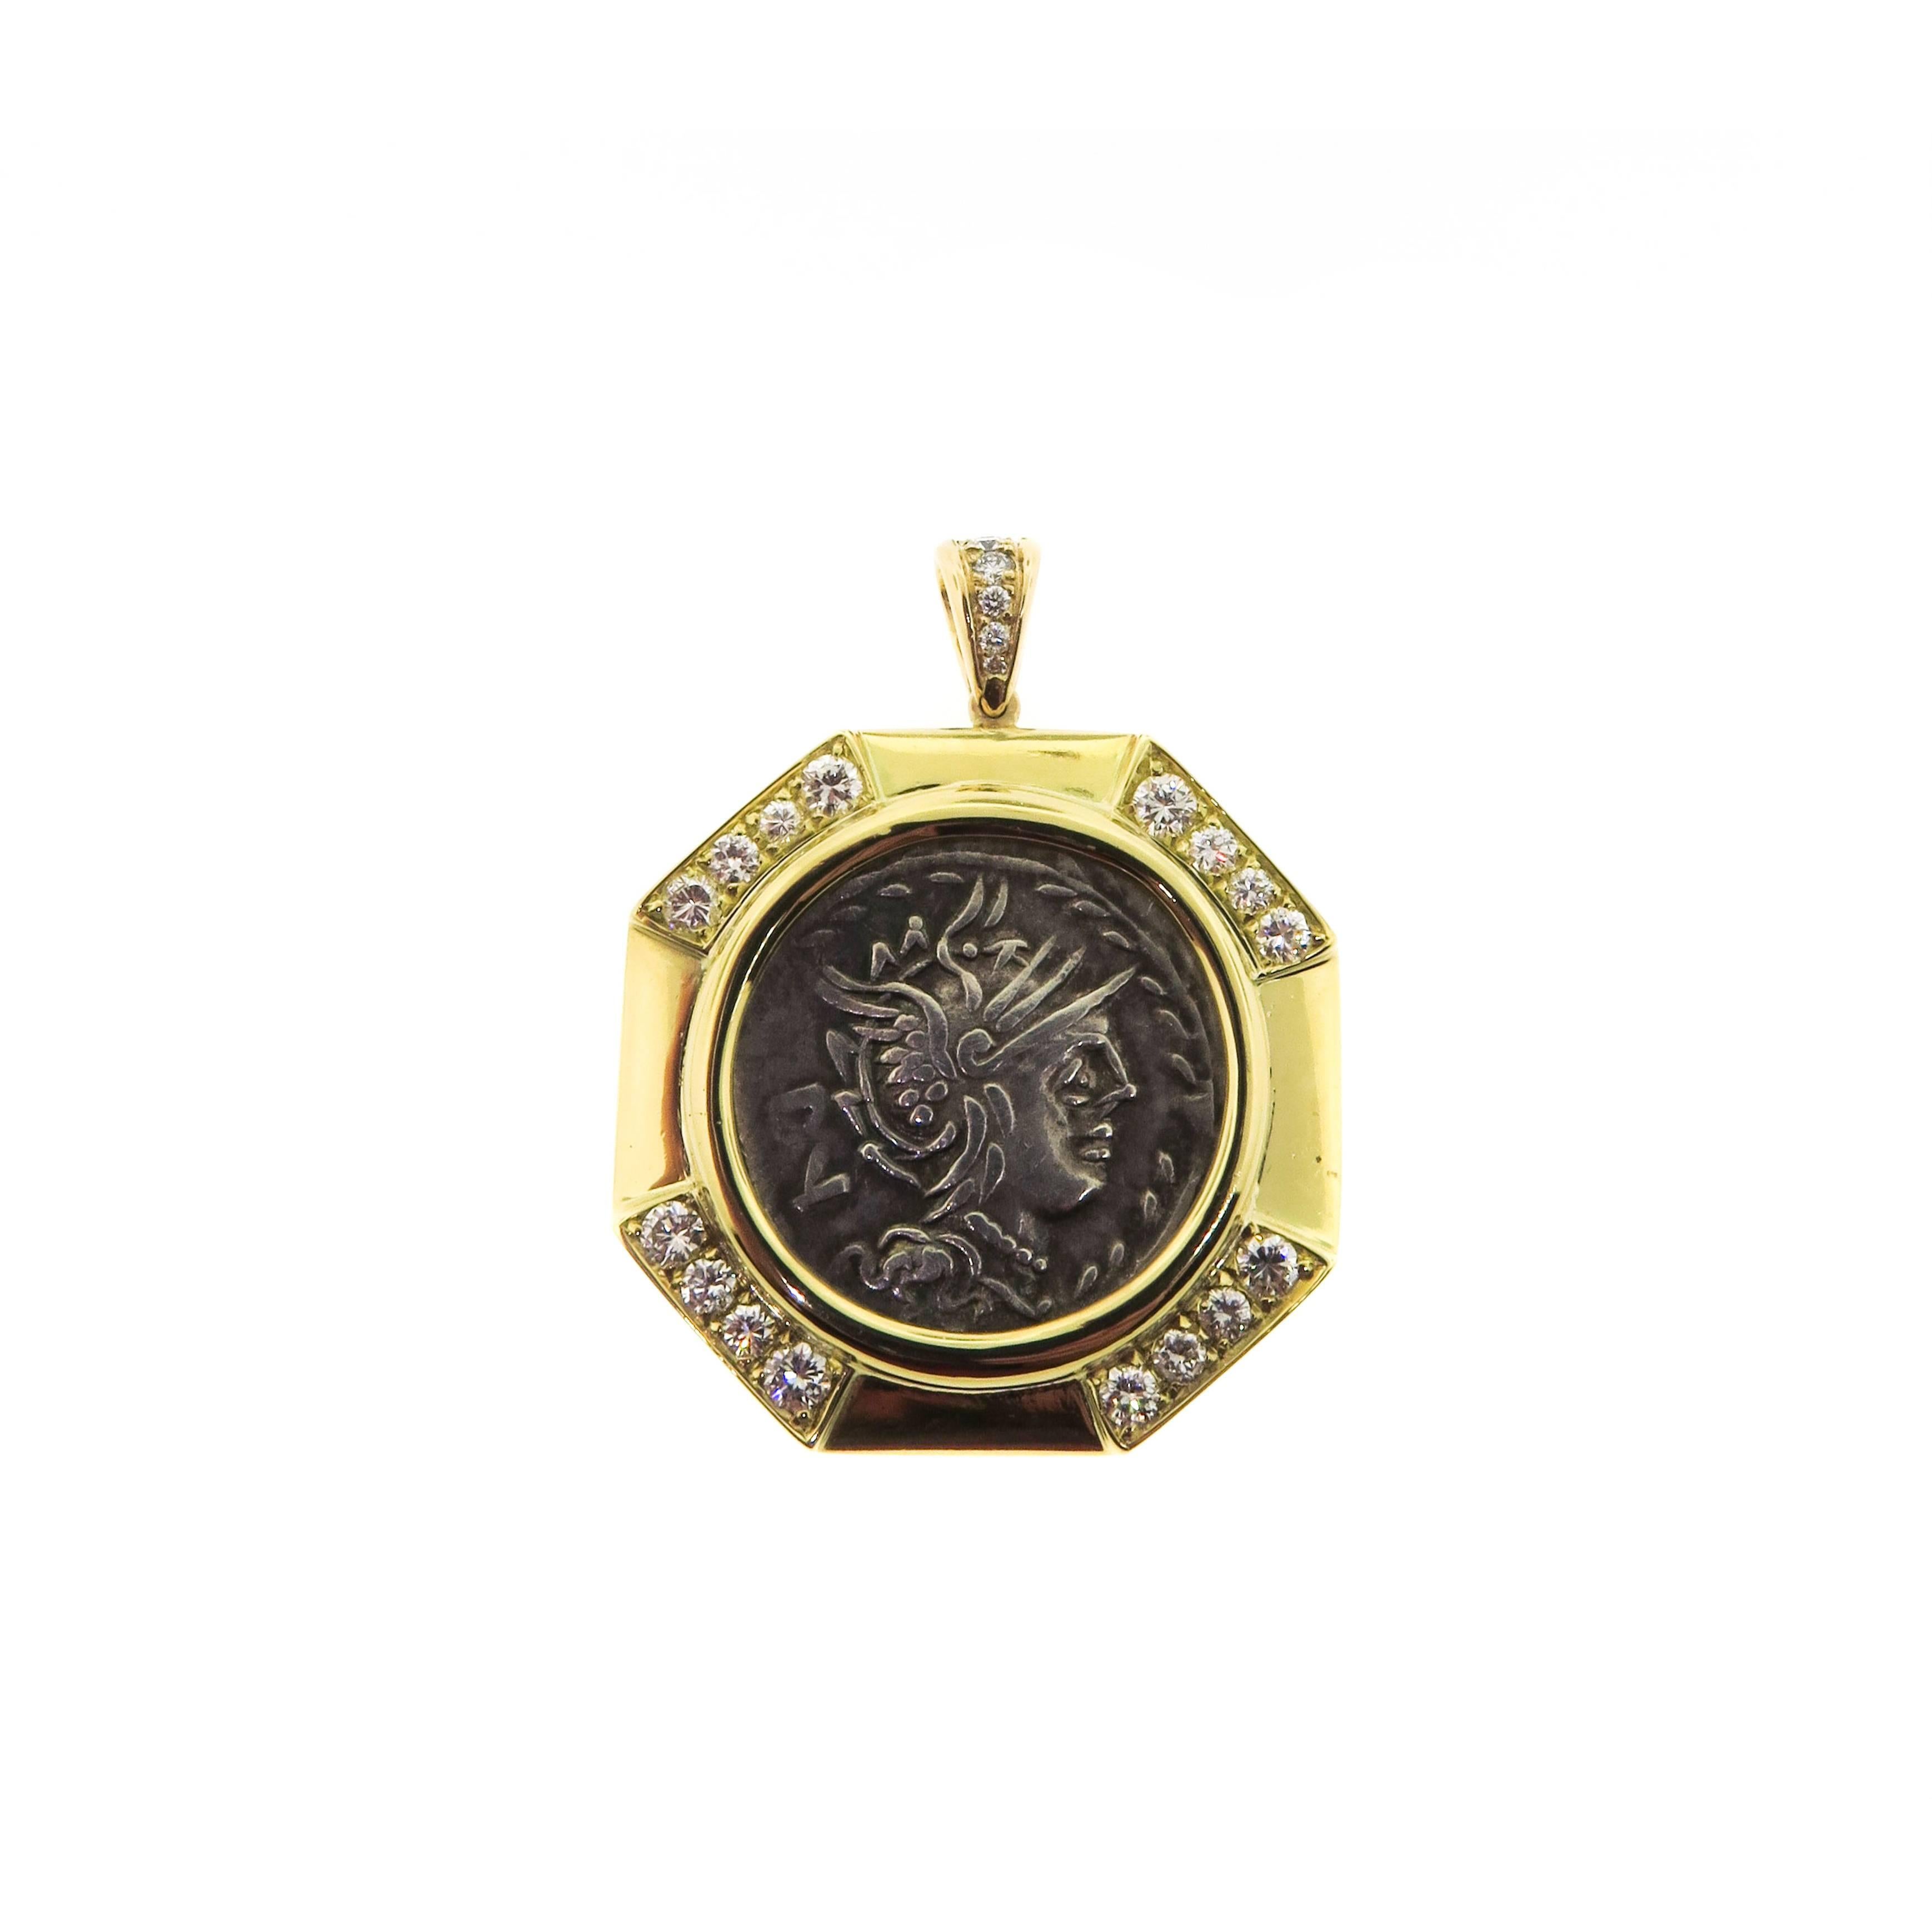 Estate 18k yellow gold necklace featuring a Sterling silver Roman Coin struck by M. Lucilius Rufus in 101 BC with Goddess Roma on one side and Victory Riding Quadriga on the other side. The octagonal frame is detailed with 4 round diamonds at each